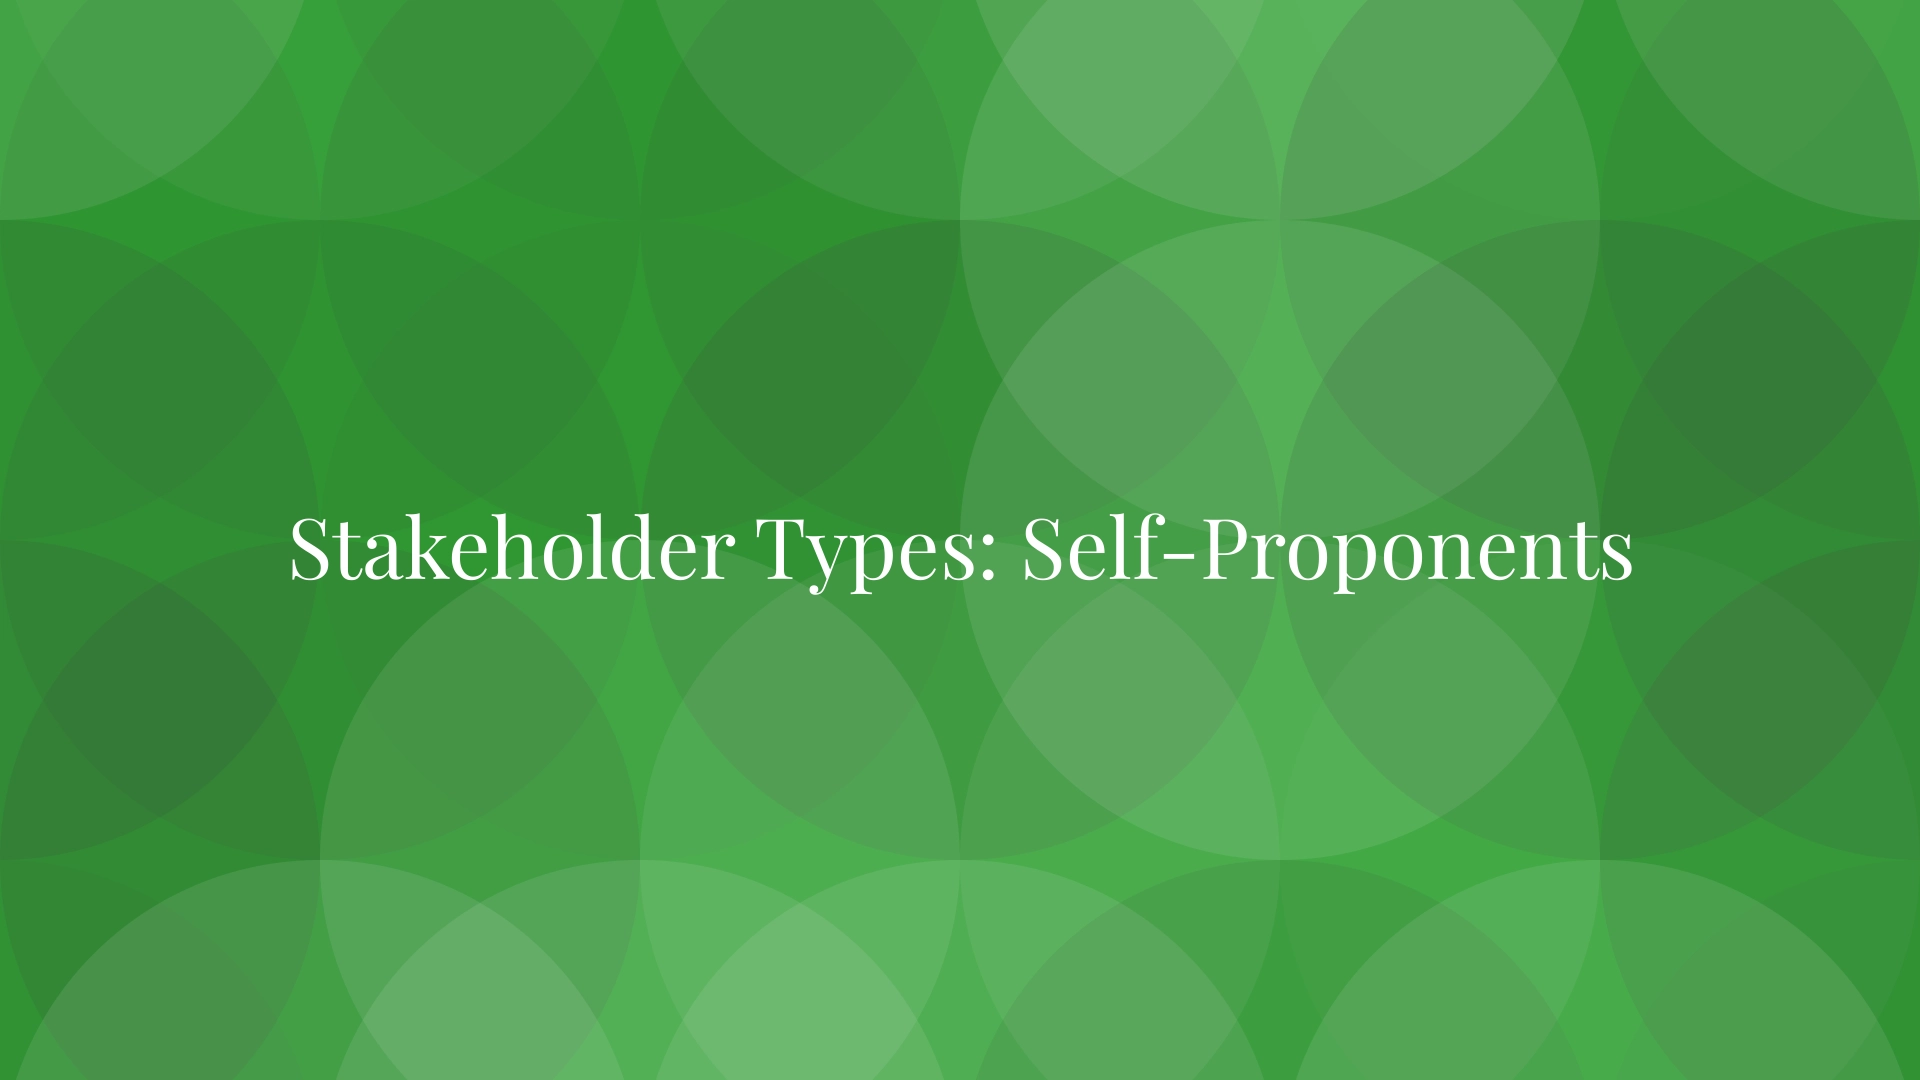 Stakeholder Types: Self-Proponents